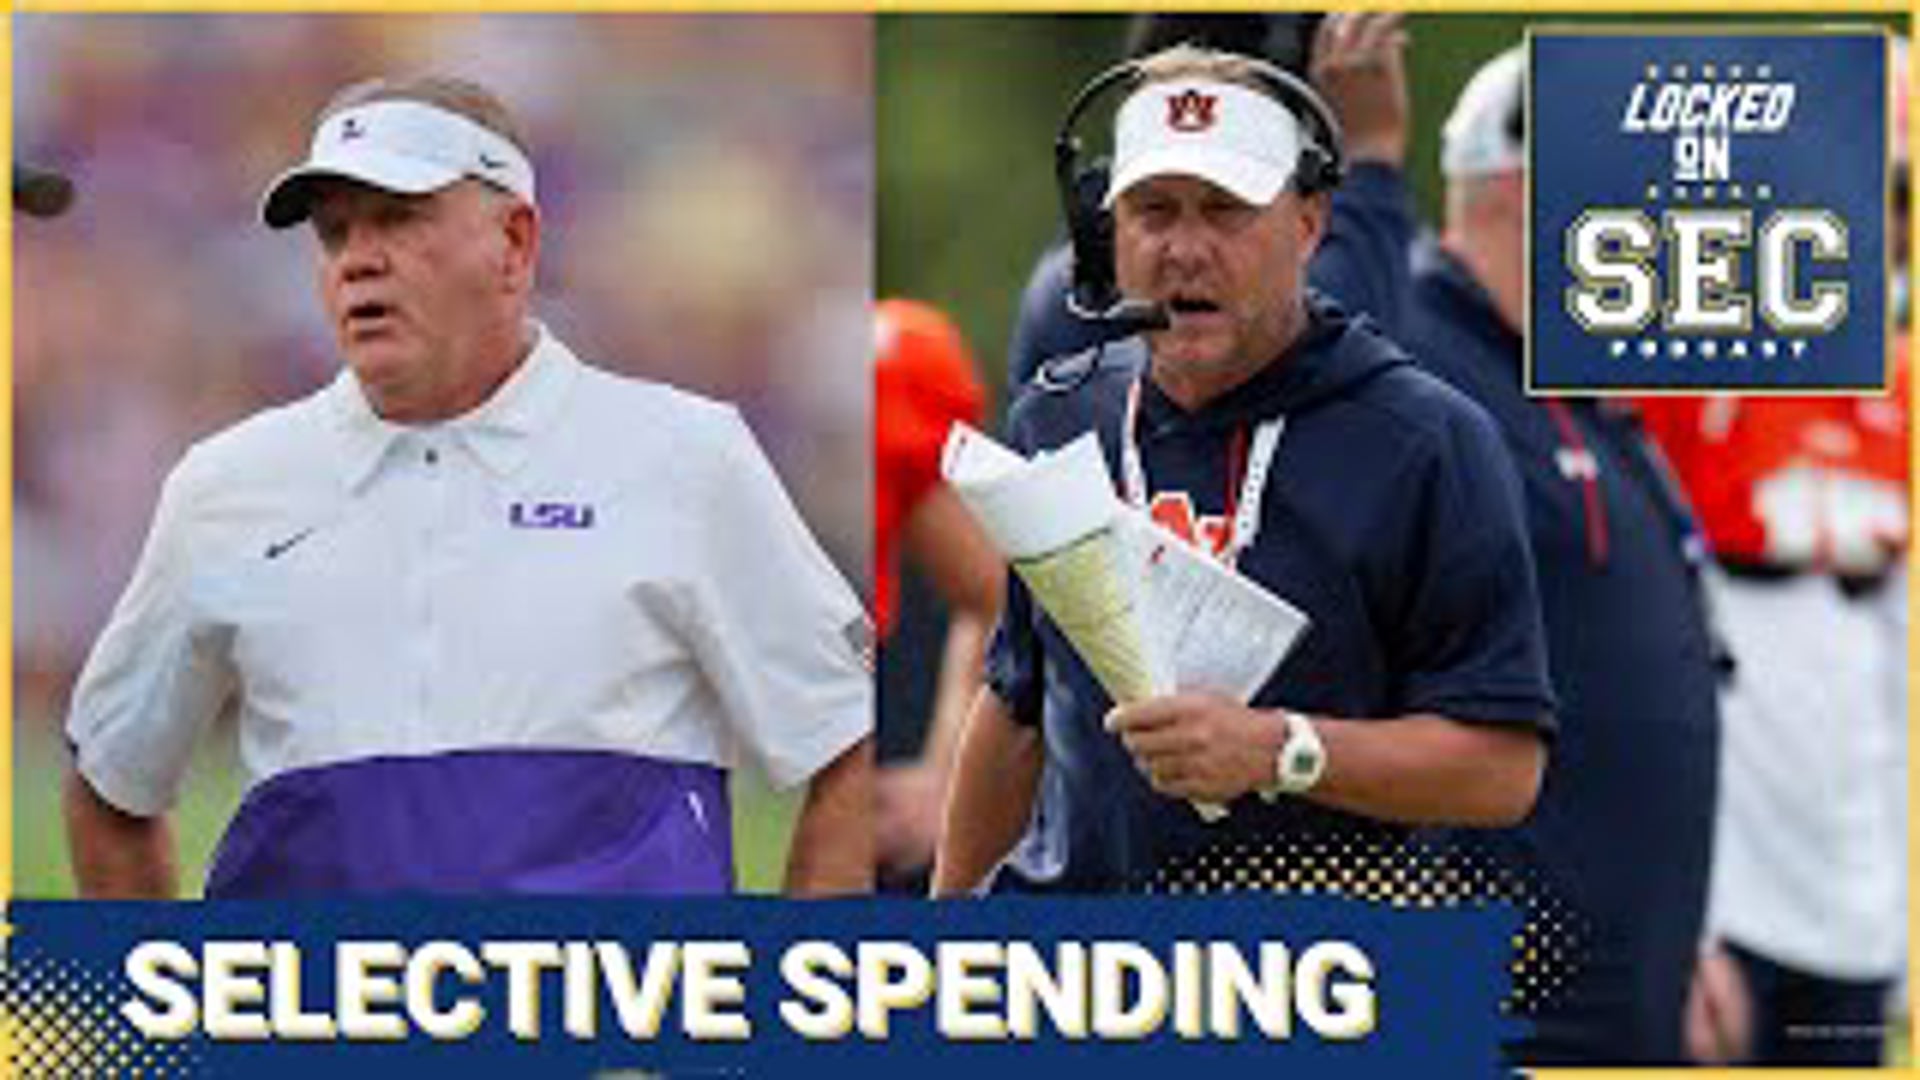 On today's show, we discuss Hugh Freeze saying he "couldn't bring himself" to spend $1 million on a Transfer Portal QB, but is that the right approach?